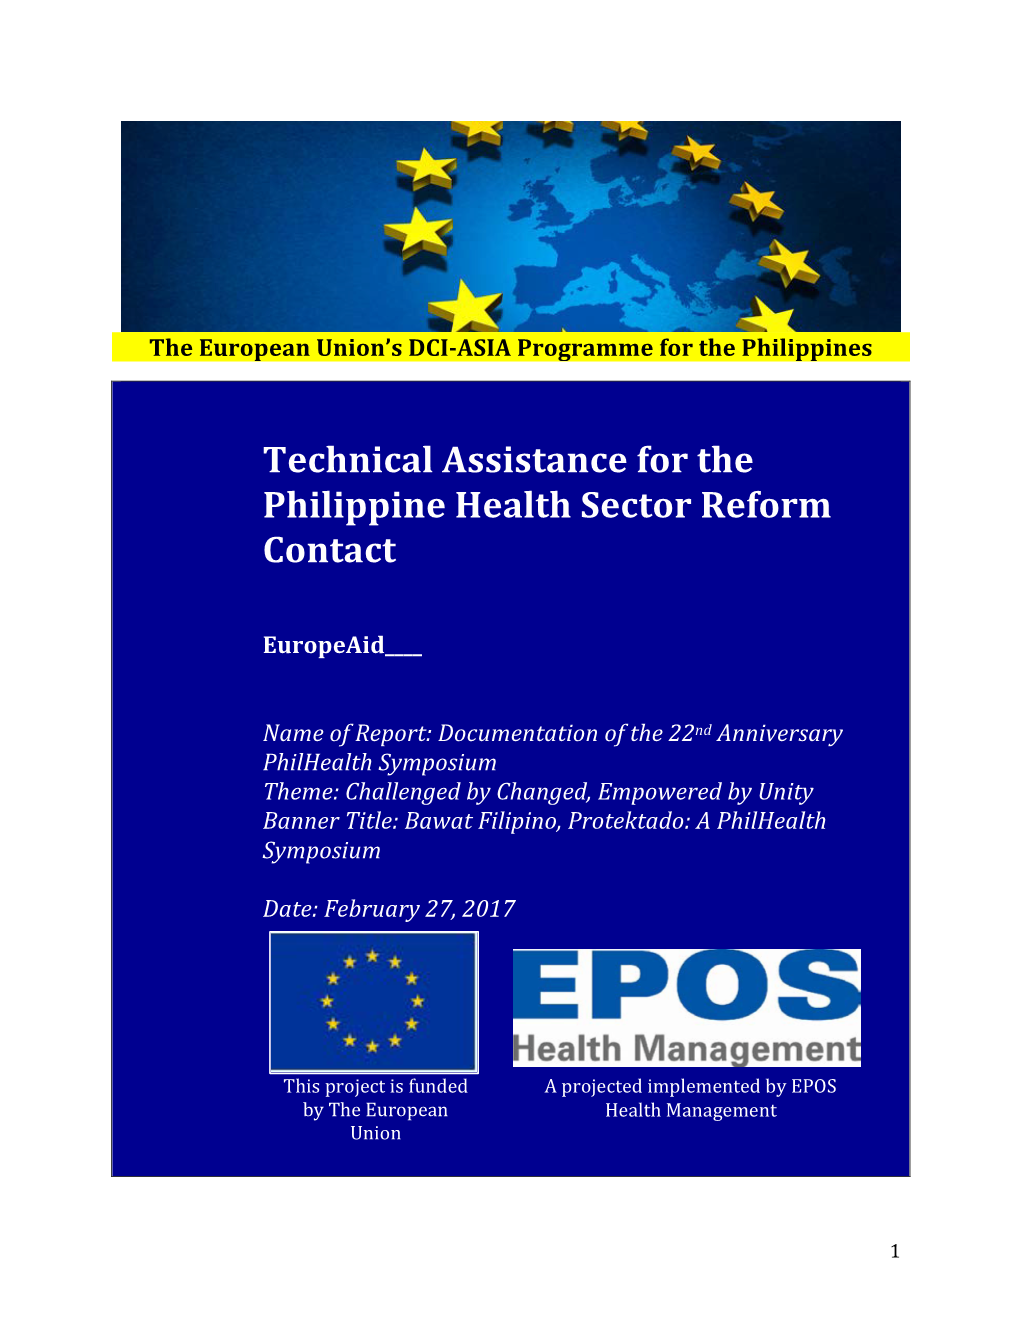 Technical Assistance for the Philippine Health Sector Reform Contact